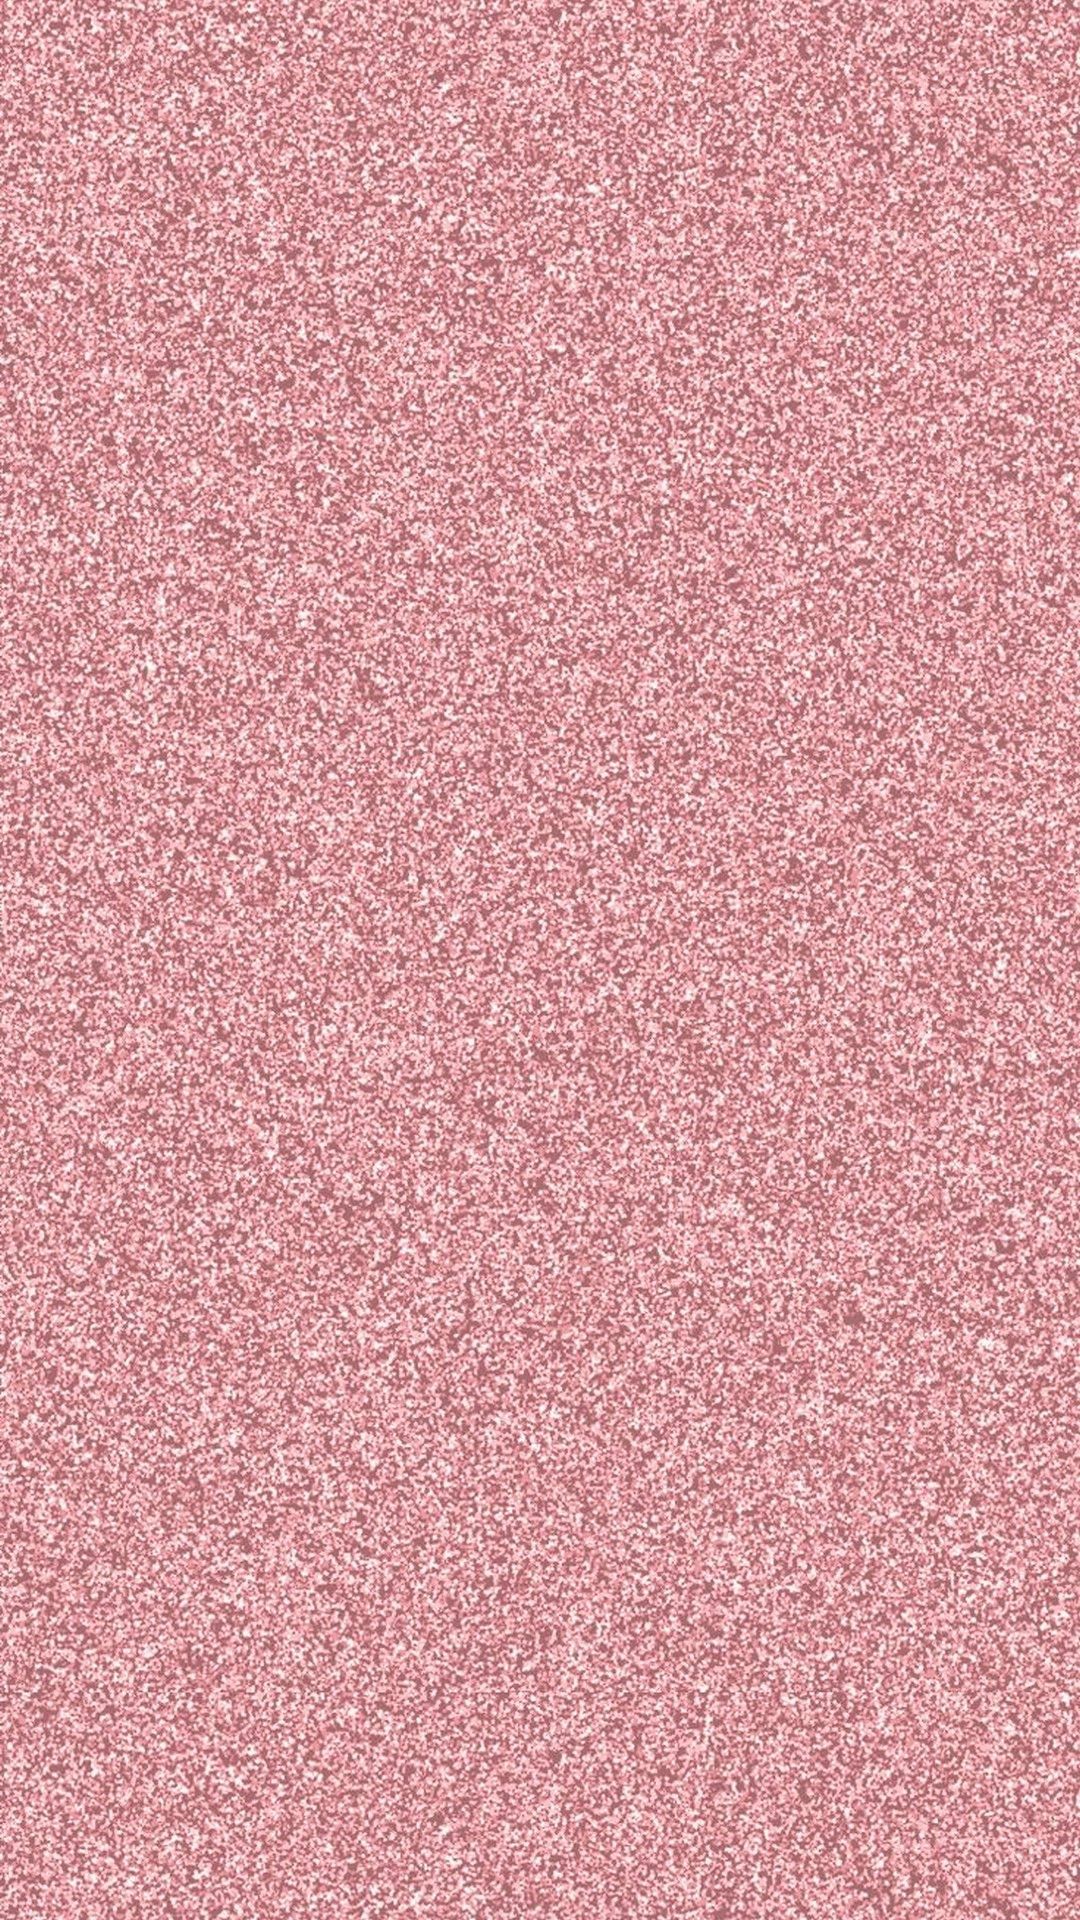 Glitter Wallpaper Image For iPhone Wallpaper on Hupages.com, if you like it dont forget save it or re. Pink glitter wallpaper, Glitter wallpaper, Pink wallpaper